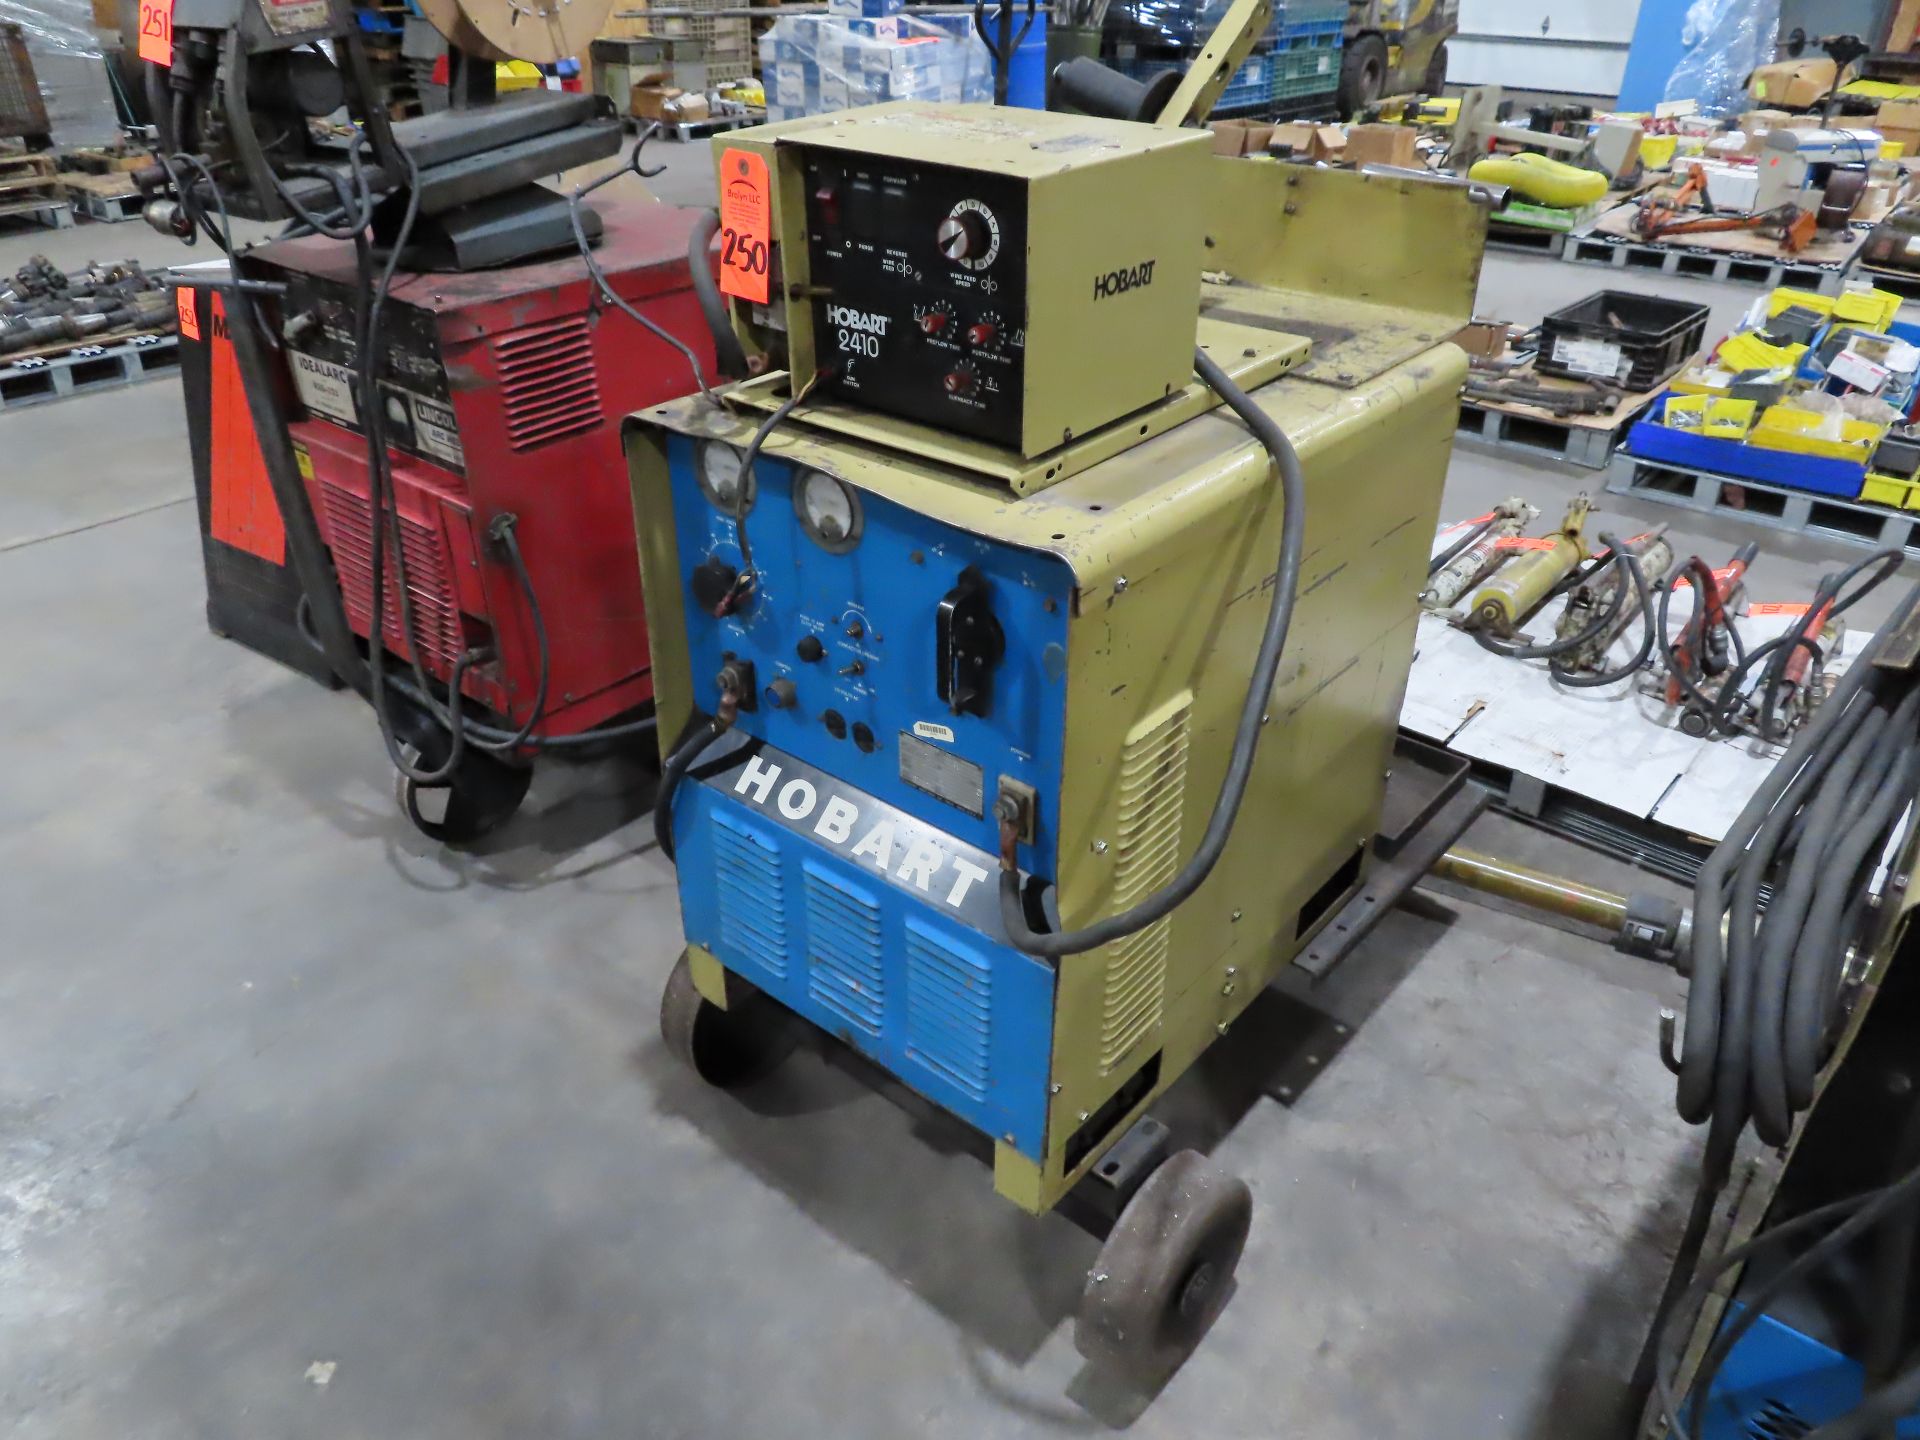 Hobart 300 amp welder with Hobart 2410 feed unit. This item can be picked up onsite with no